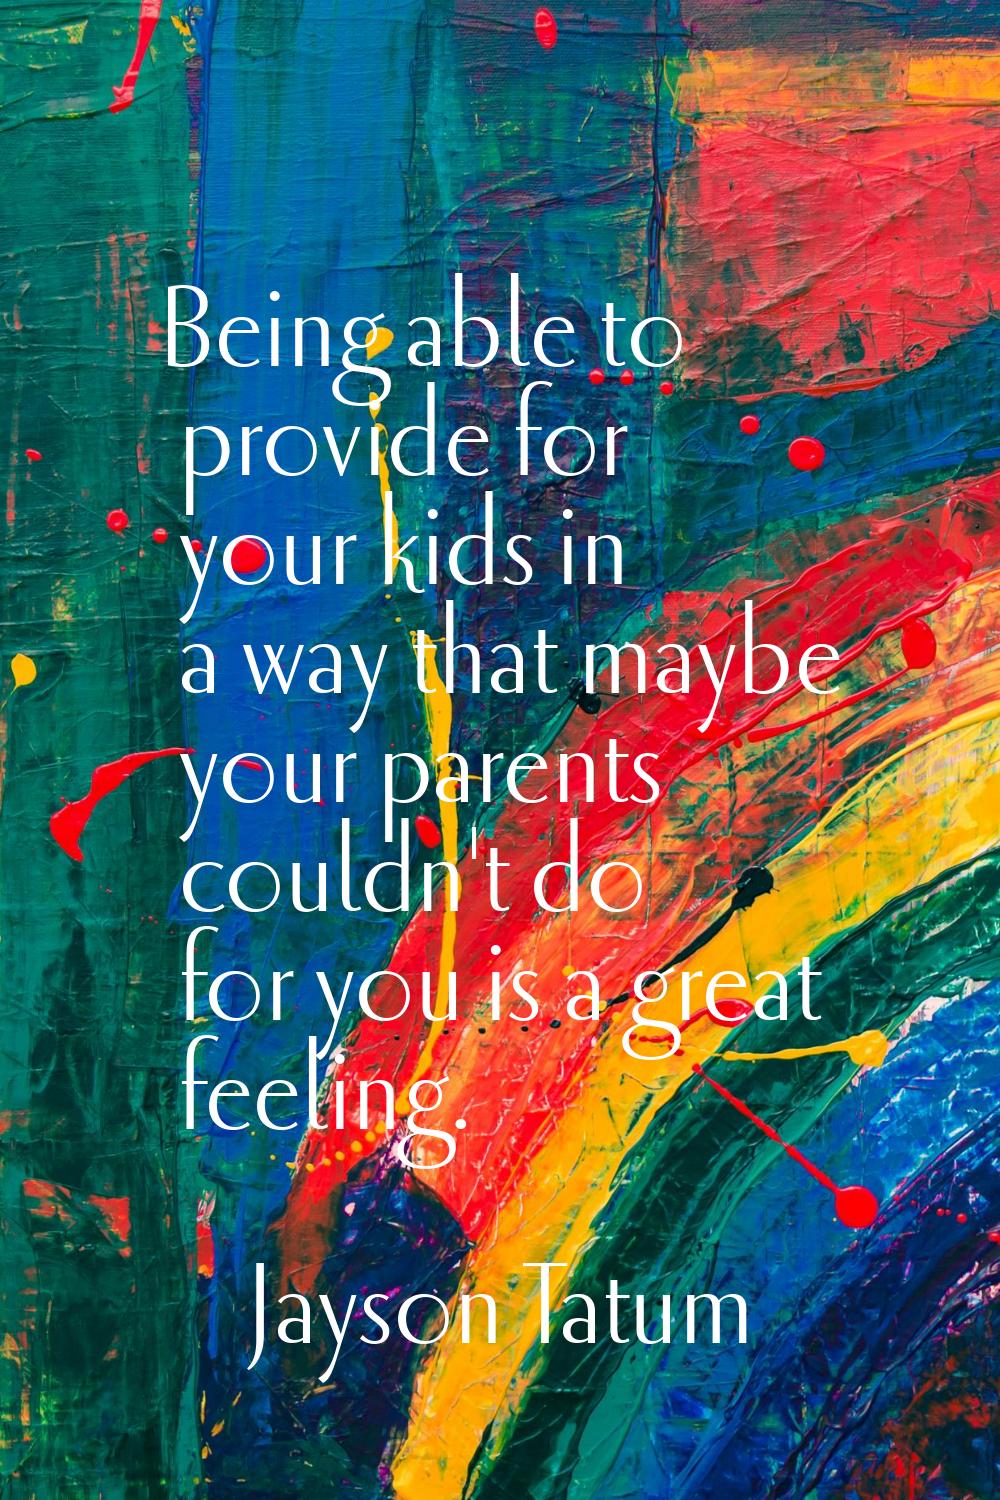 Being able to provide for your kids in a way that maybe your parents couldn't do for you is a great